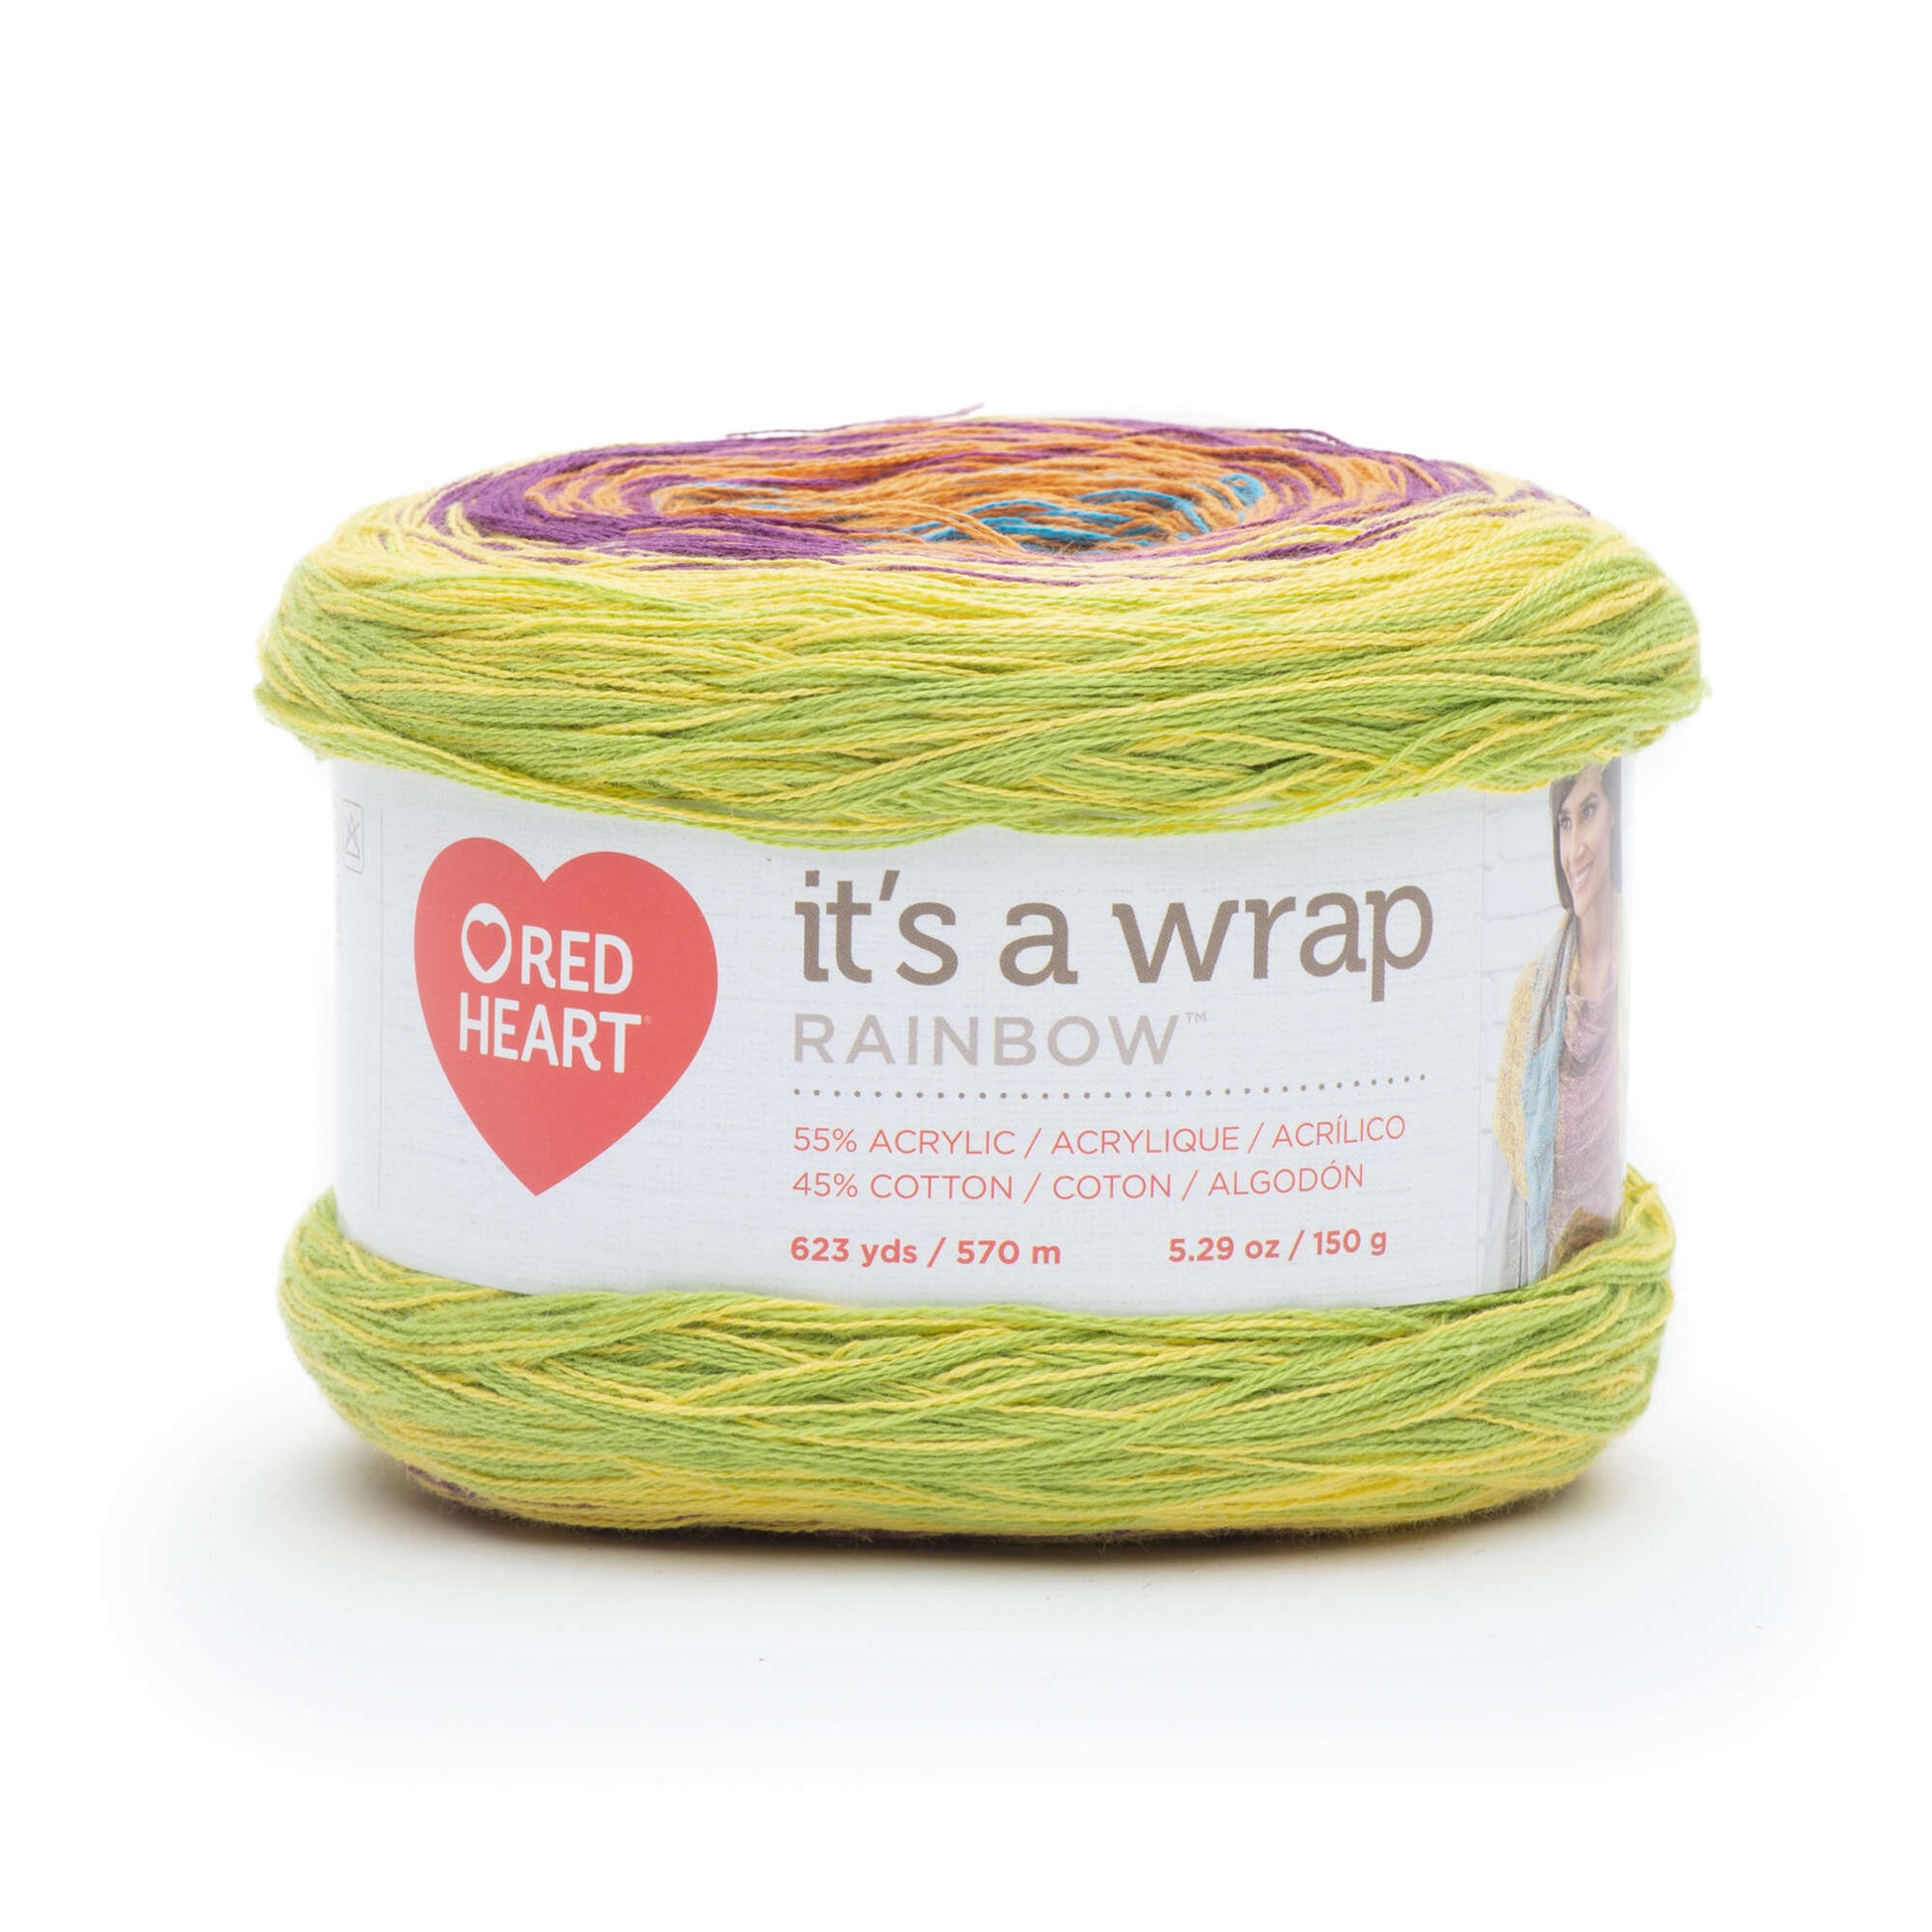 Red Heart It's a Wrap Rainbow Yarn - Discontinued Shades